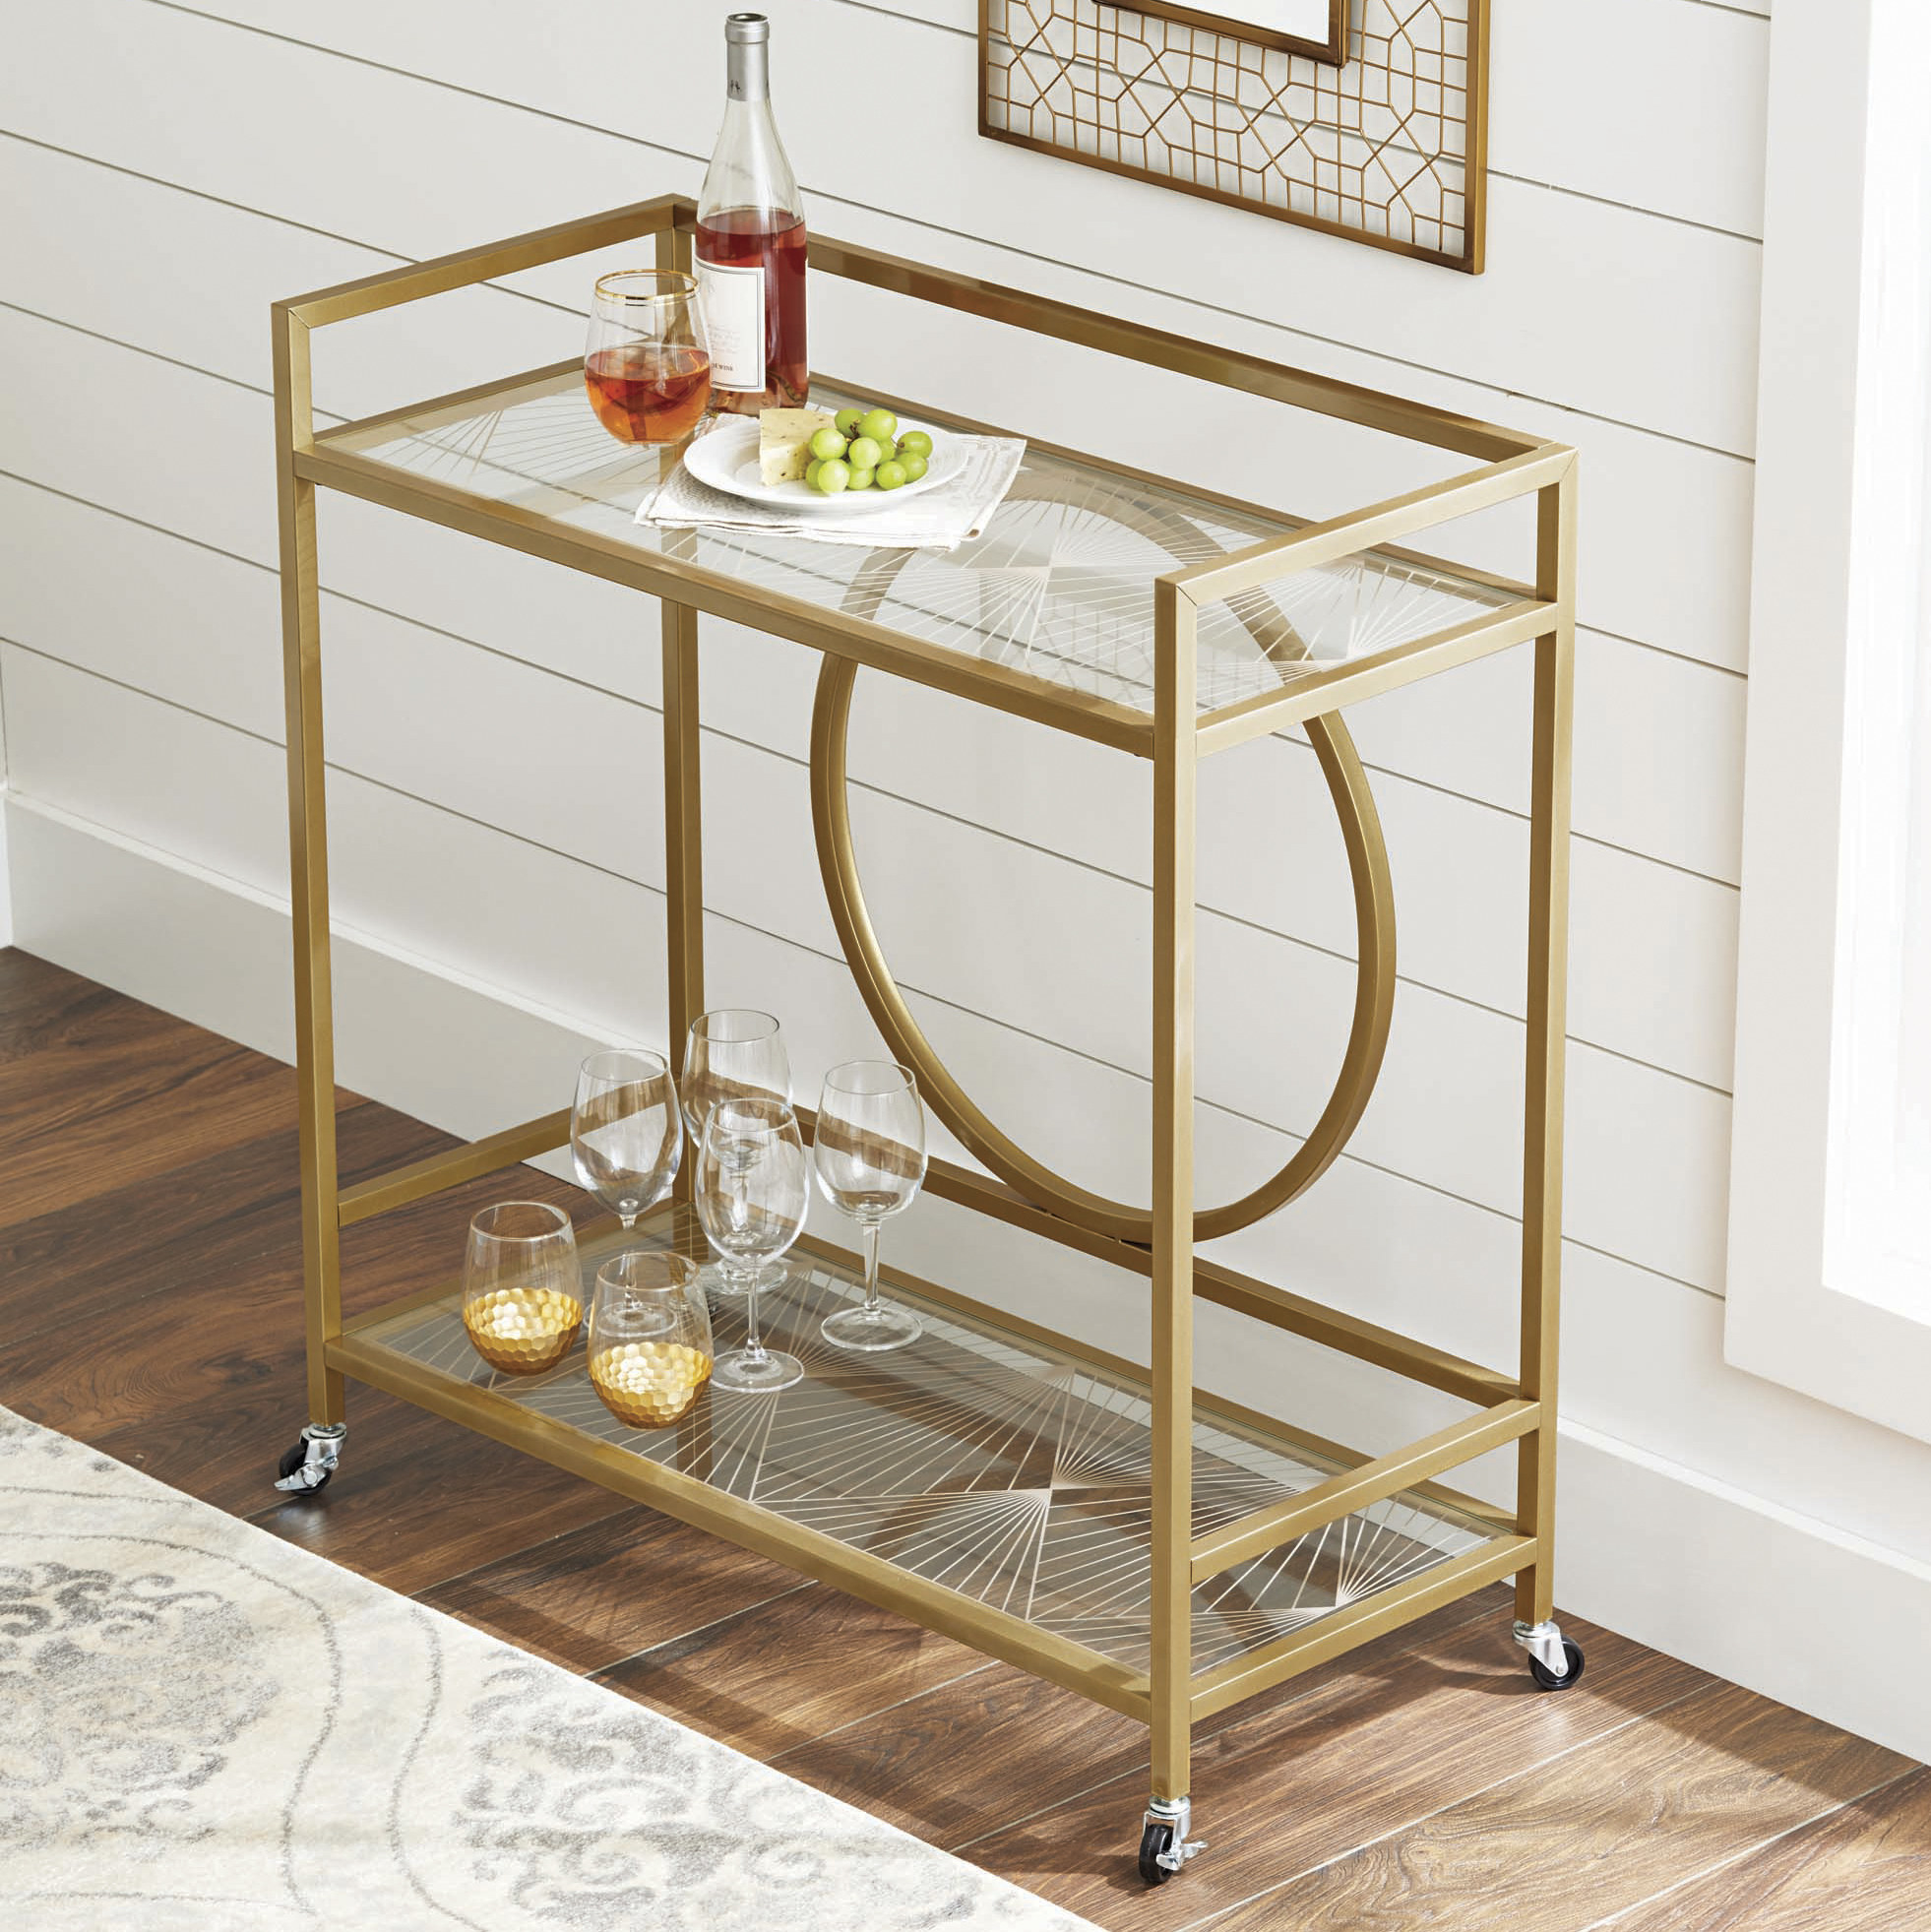 Bar cart holding wine and various glasses